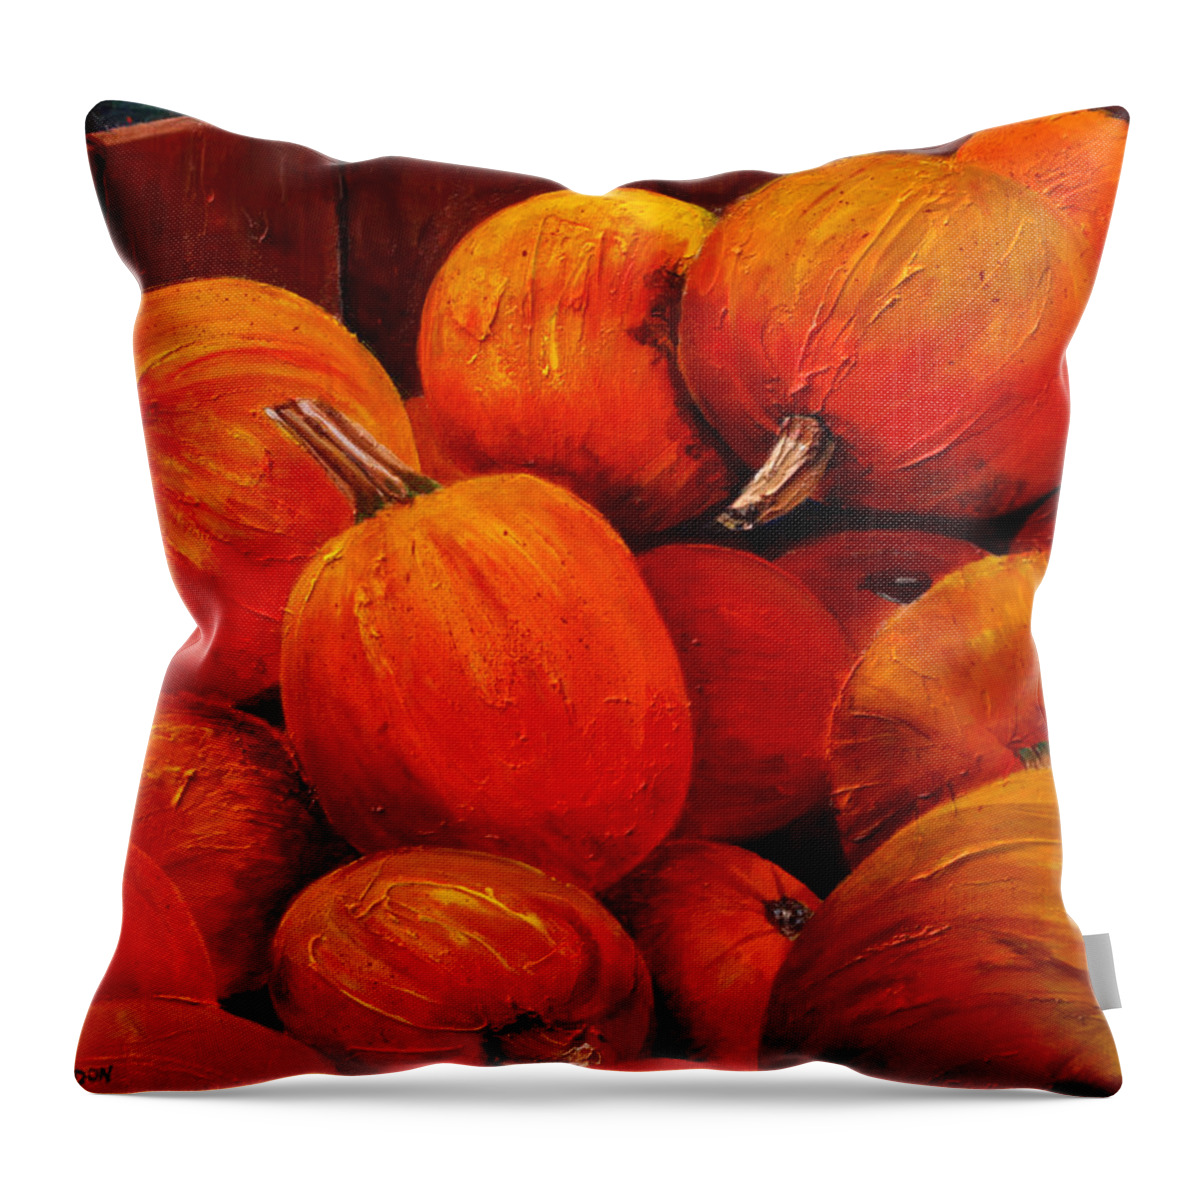 Autumn Throw Pillow featuring the painting Farm Market Pumpkins by Phyllis London